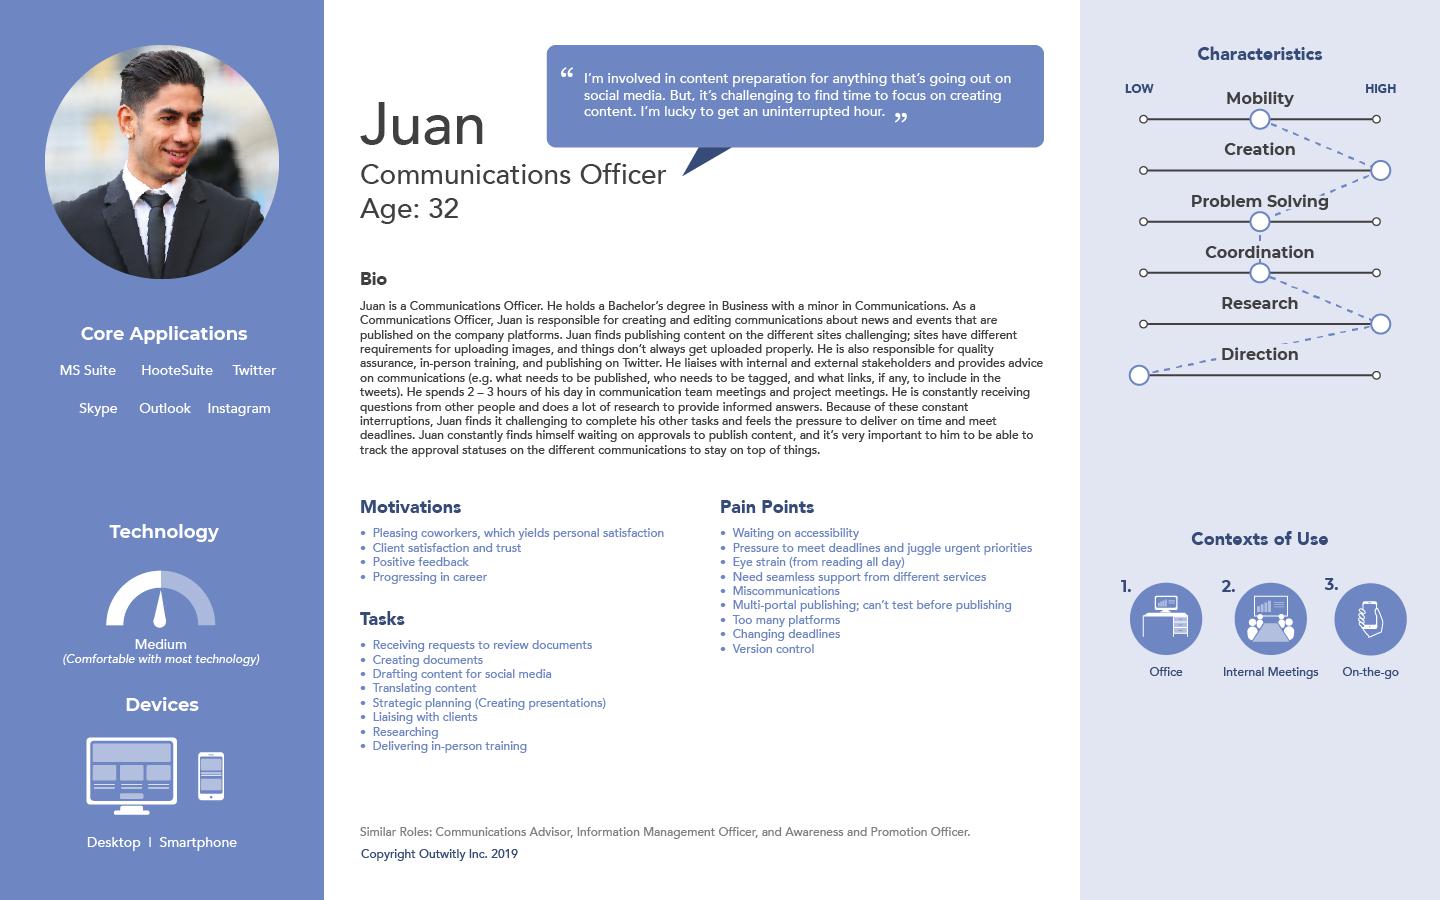 Sample persona for a communications officer